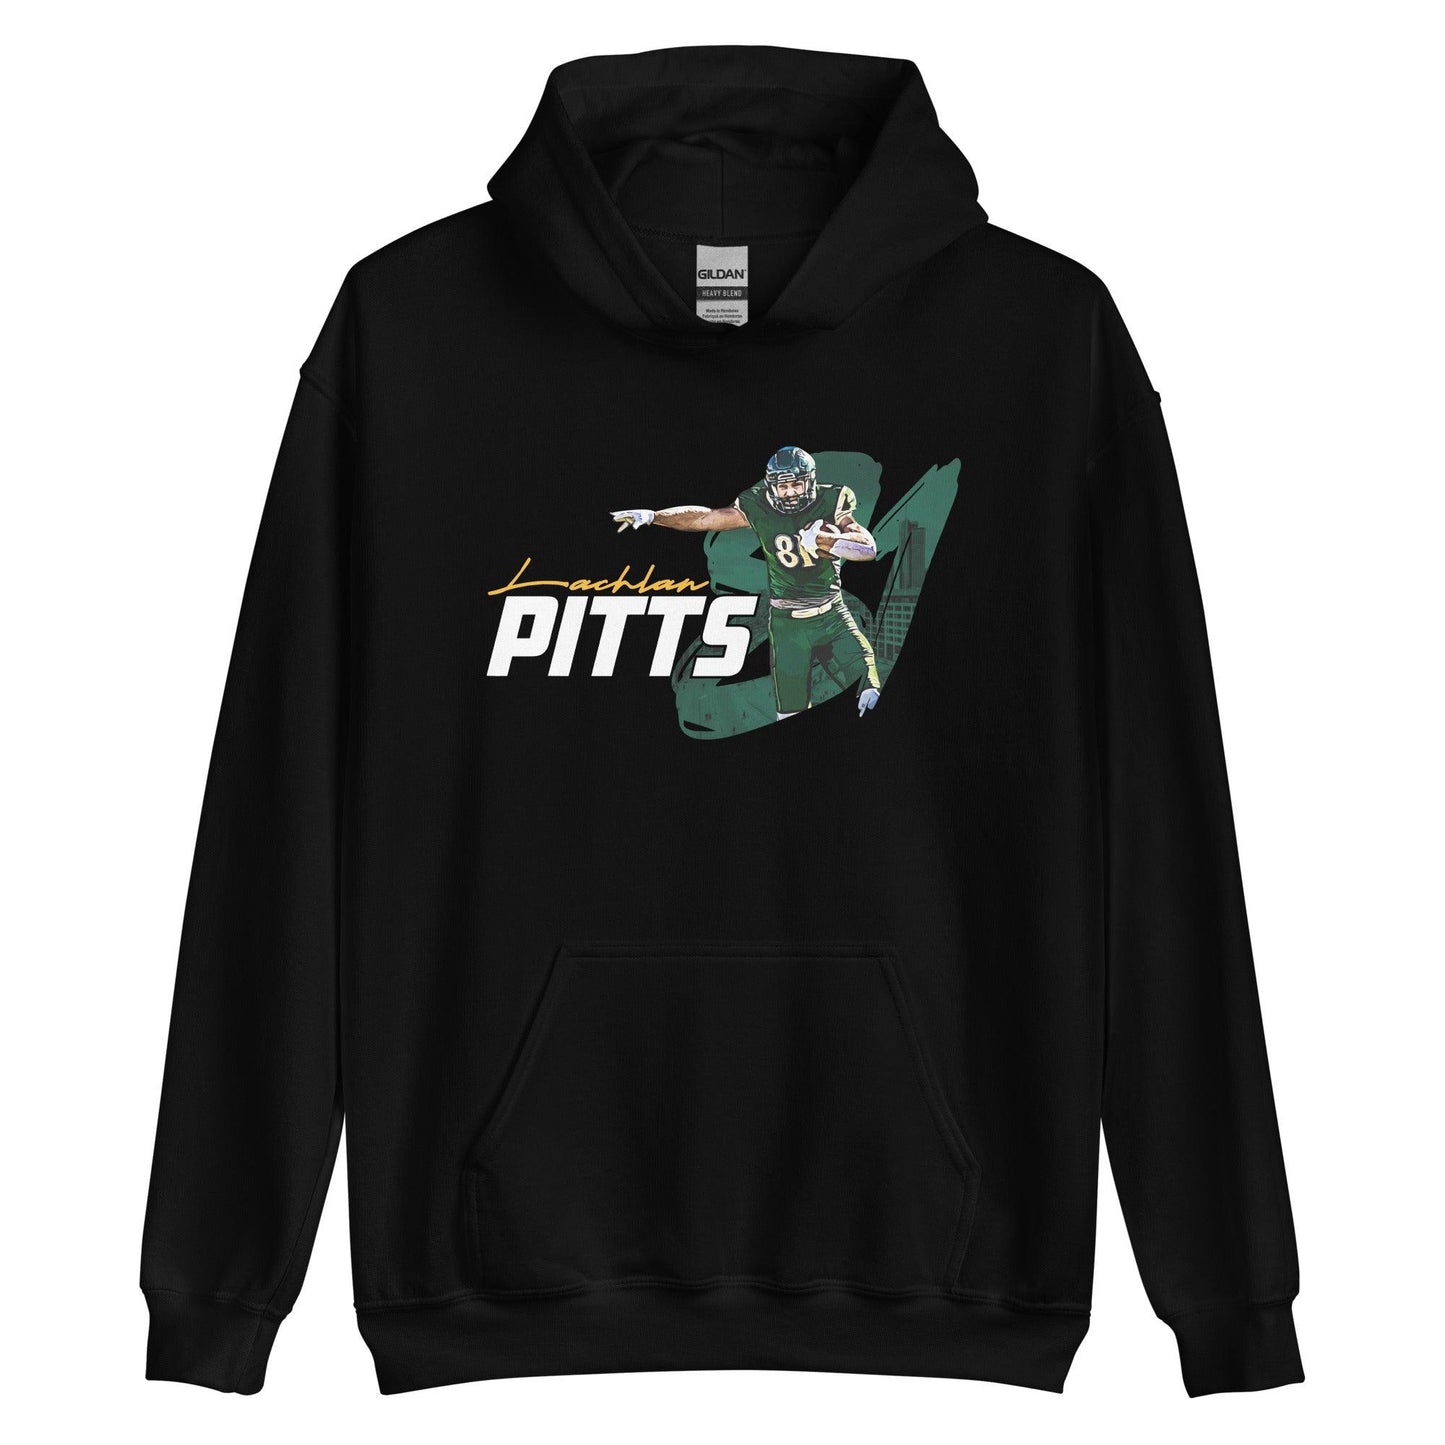 Lachlan Pitts "Gameday" Hoodie - Fan Arch